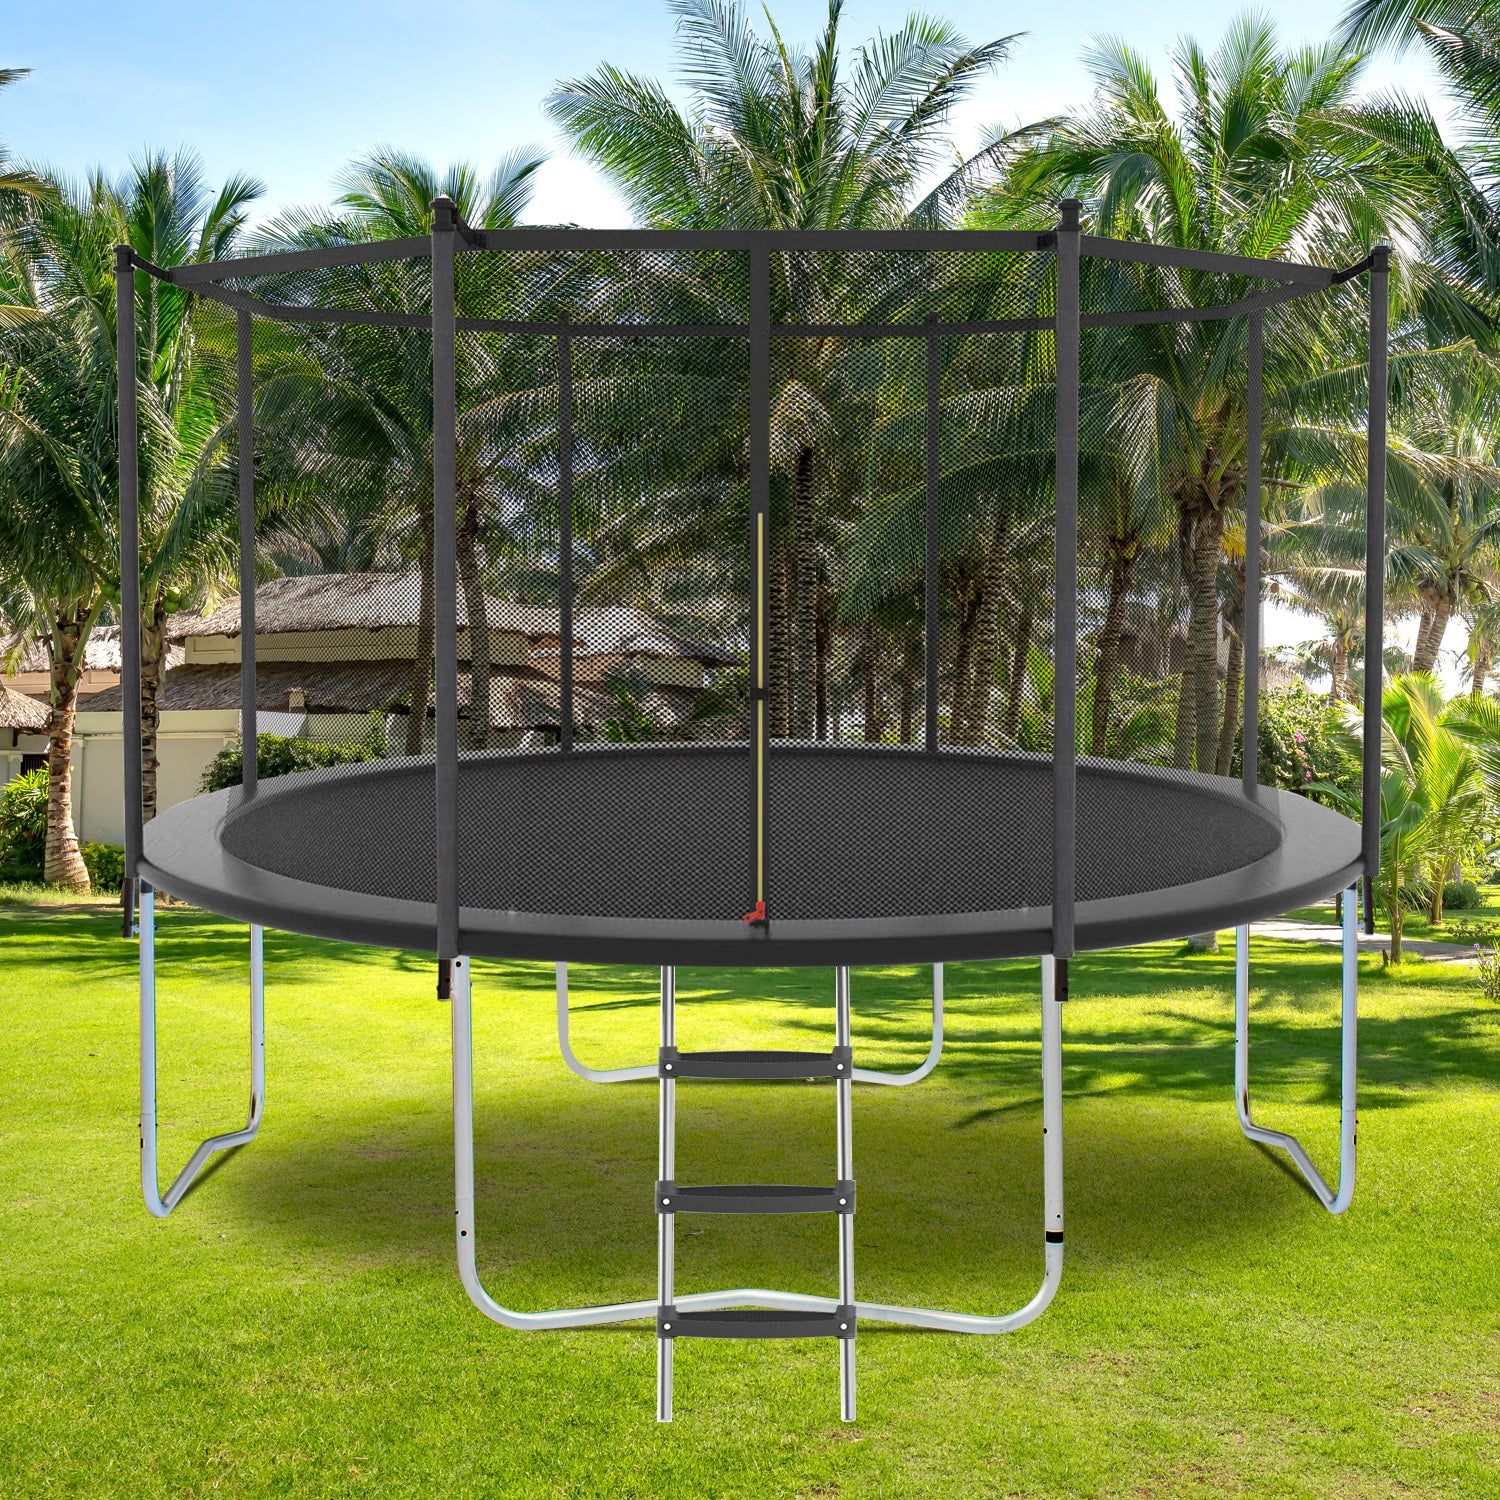 16FT Trampoline with Safety Enclosure Net, Outdoor gray-wear-resistant-garden & outdoor-iron